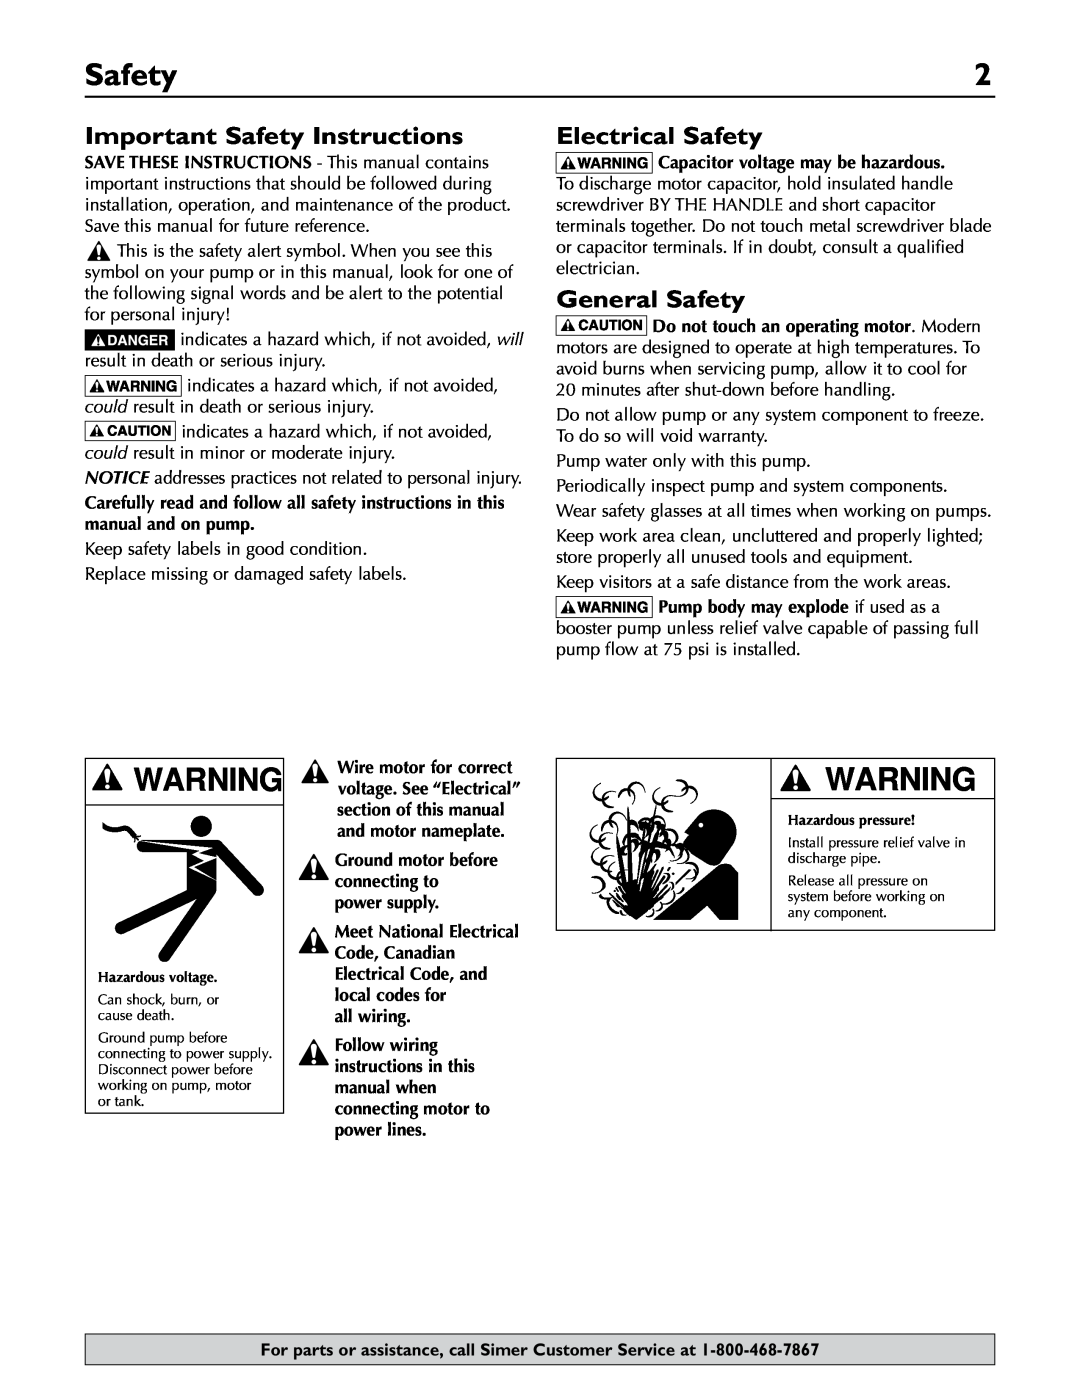 Simer Pumps 2806E owner manual Important Safety Instructions, Electrical Safety, General Safety 